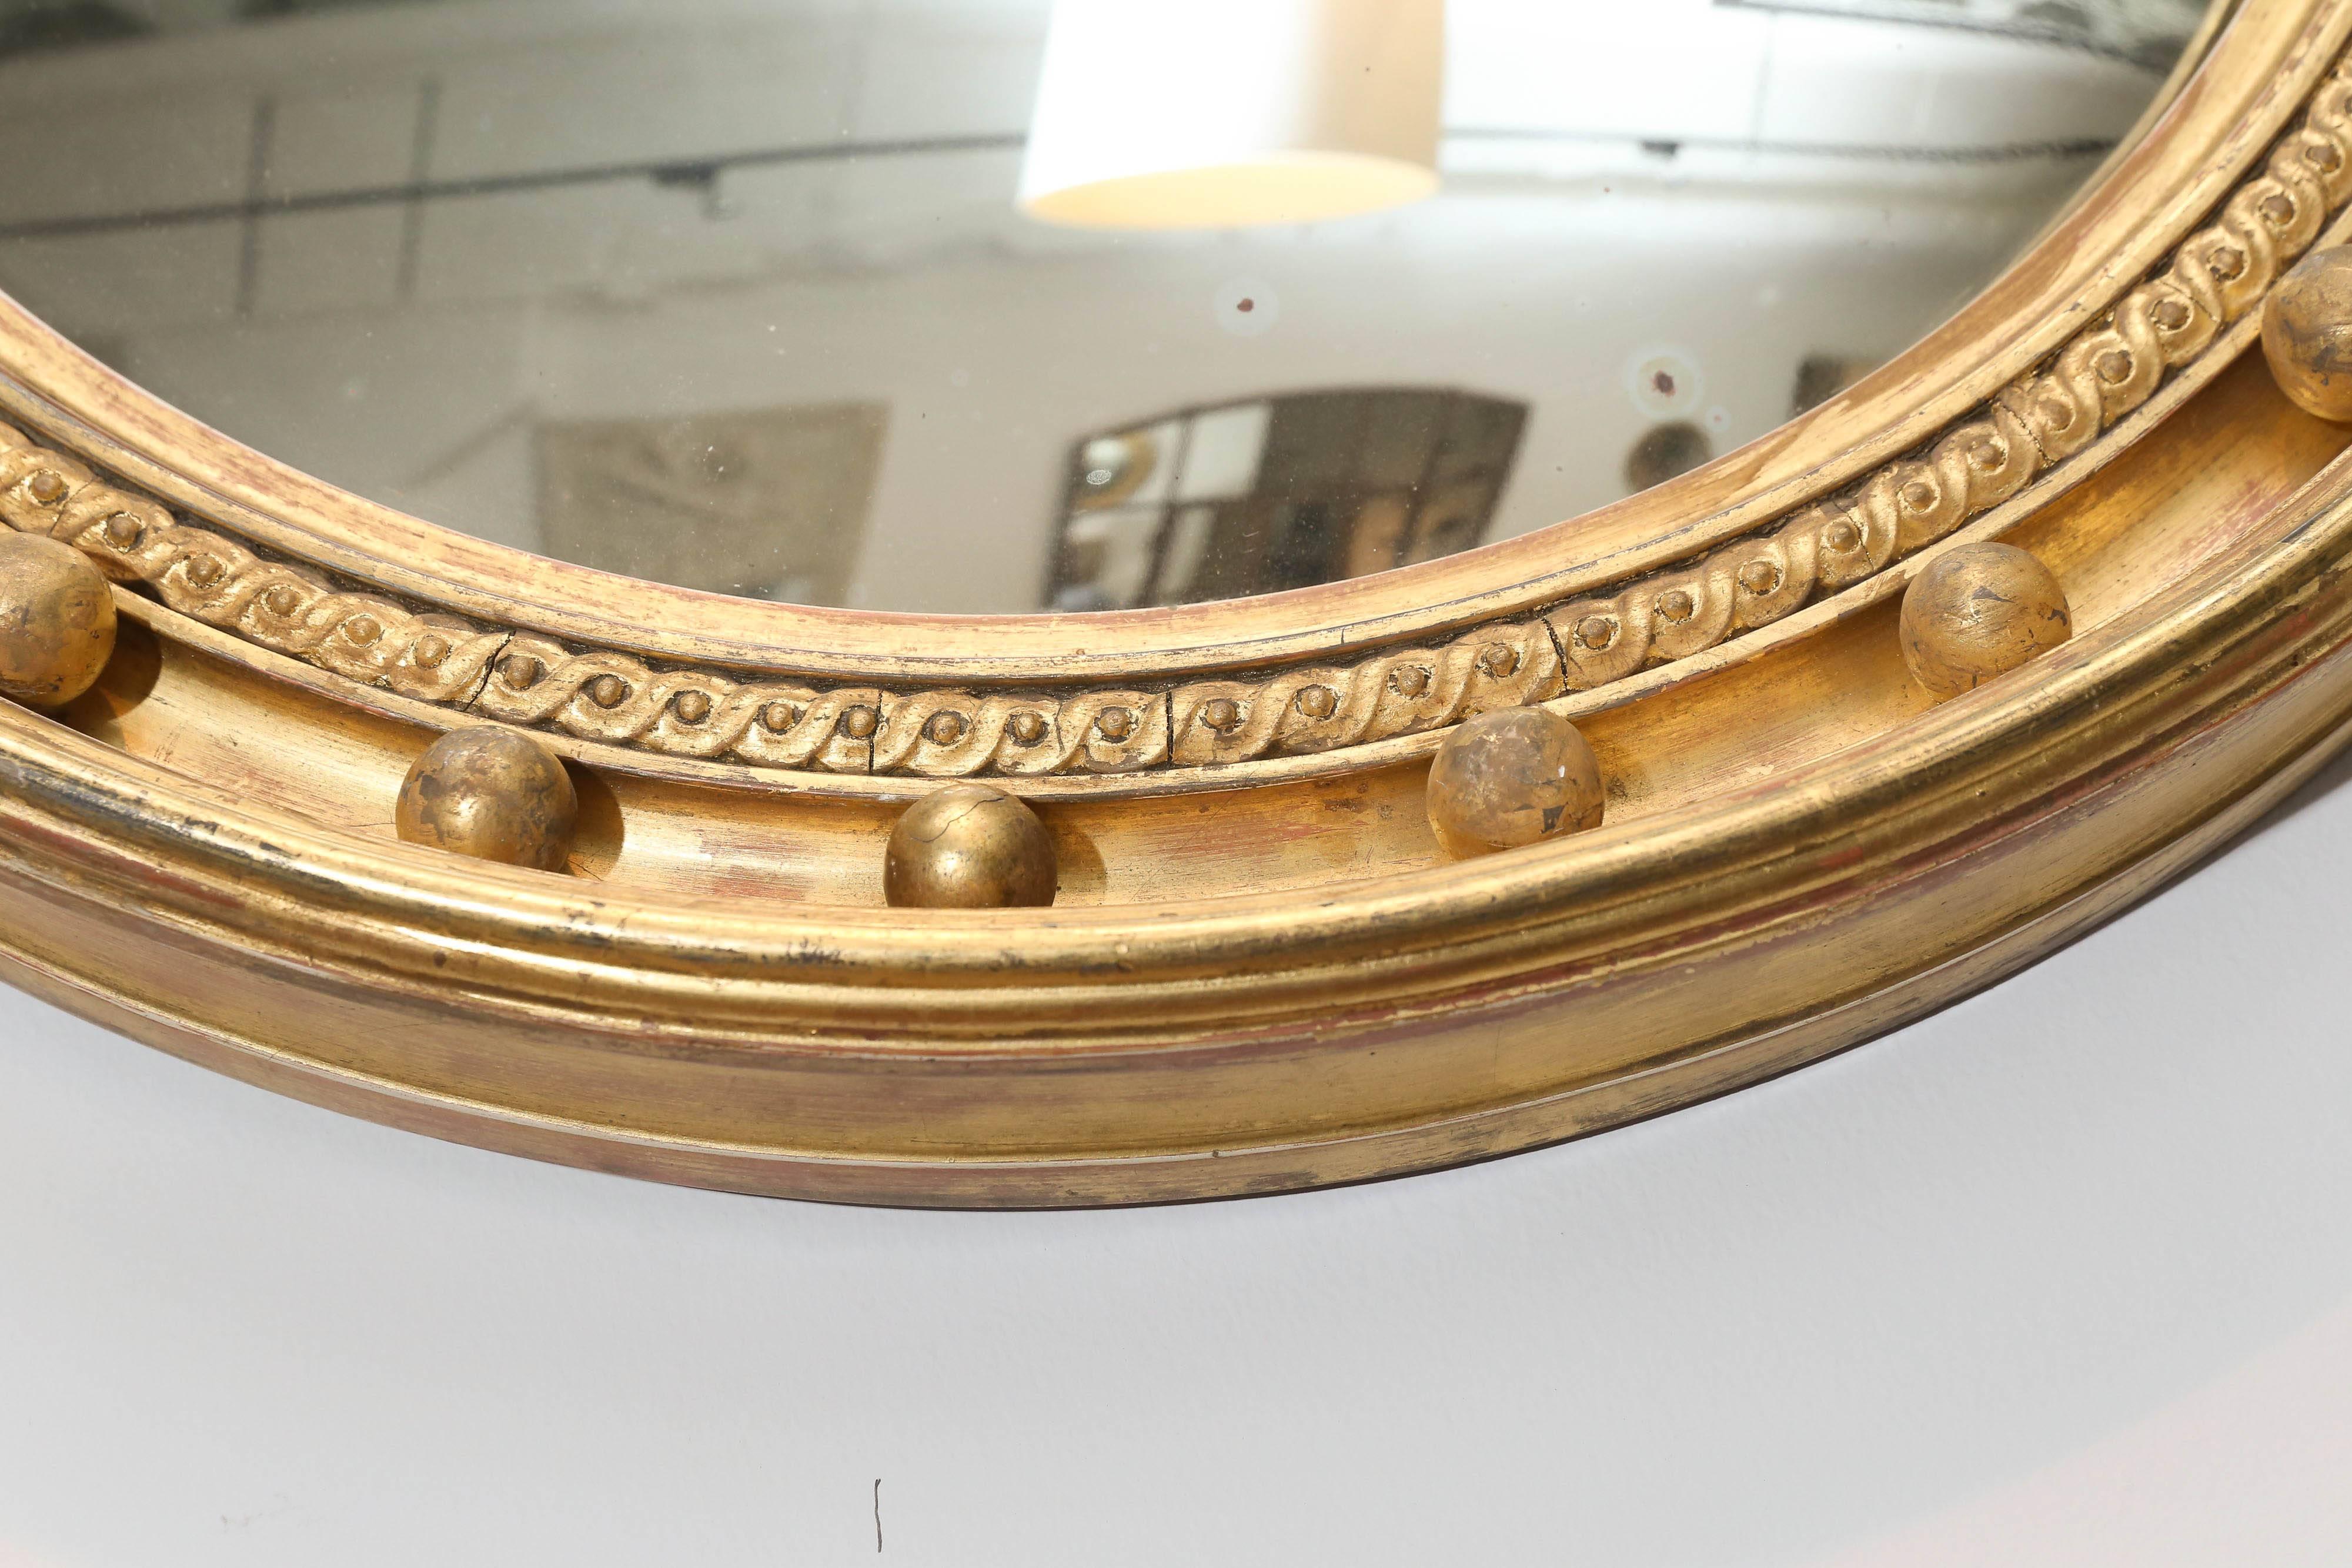 19th century convex mirror with original glass from the Regency period. Beautiful water gilding.